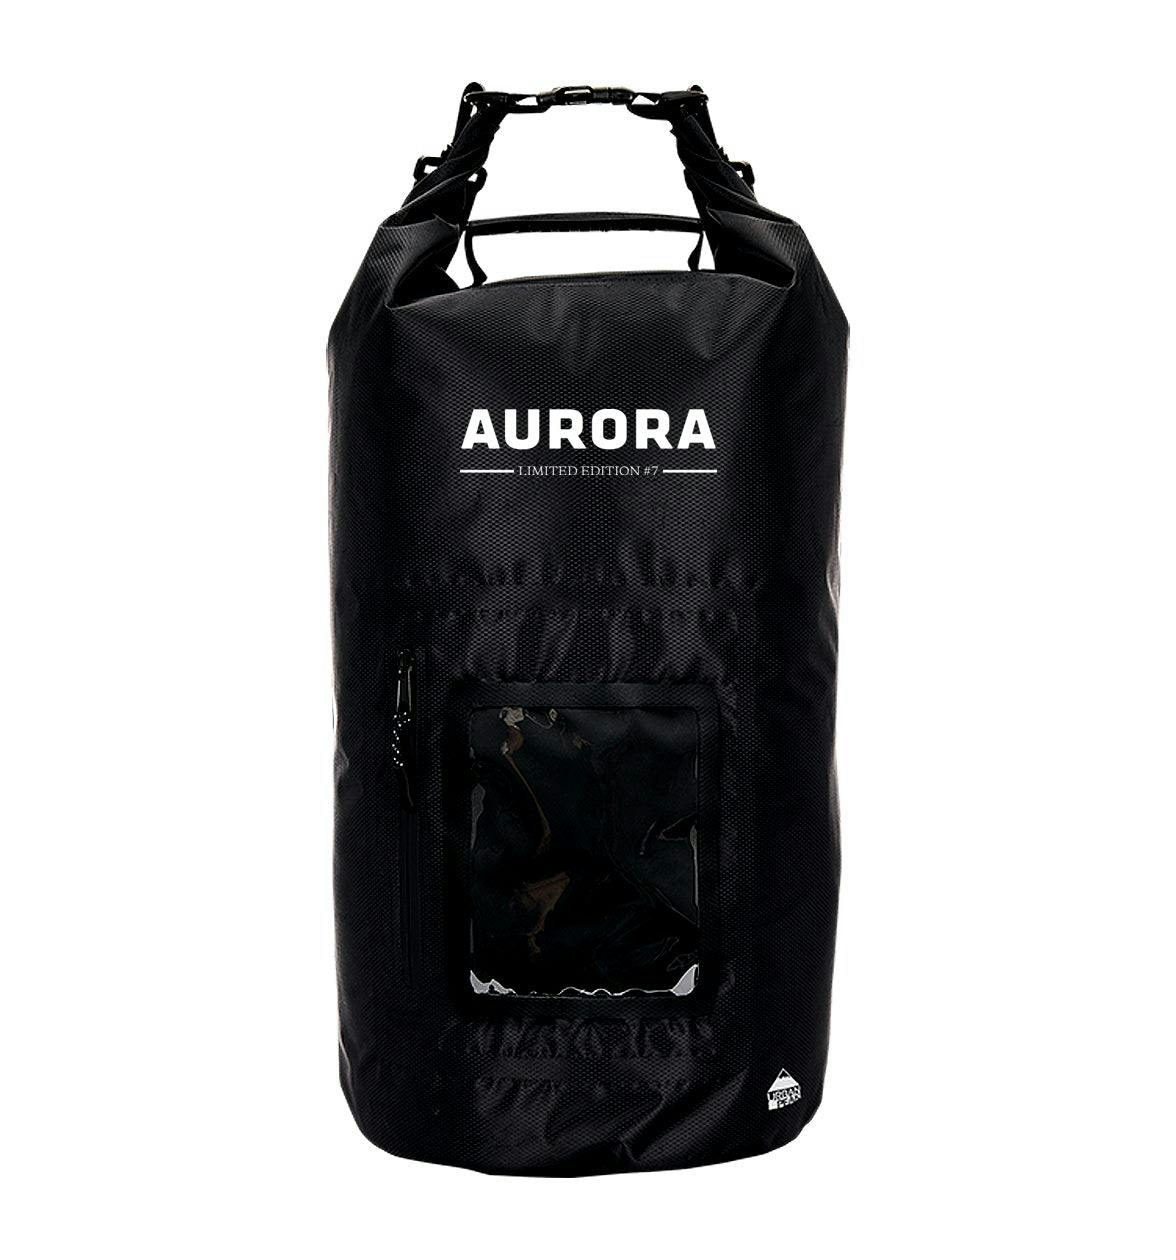 Collector Item #7 – Limited Edition Aurora Dry Bag - $0